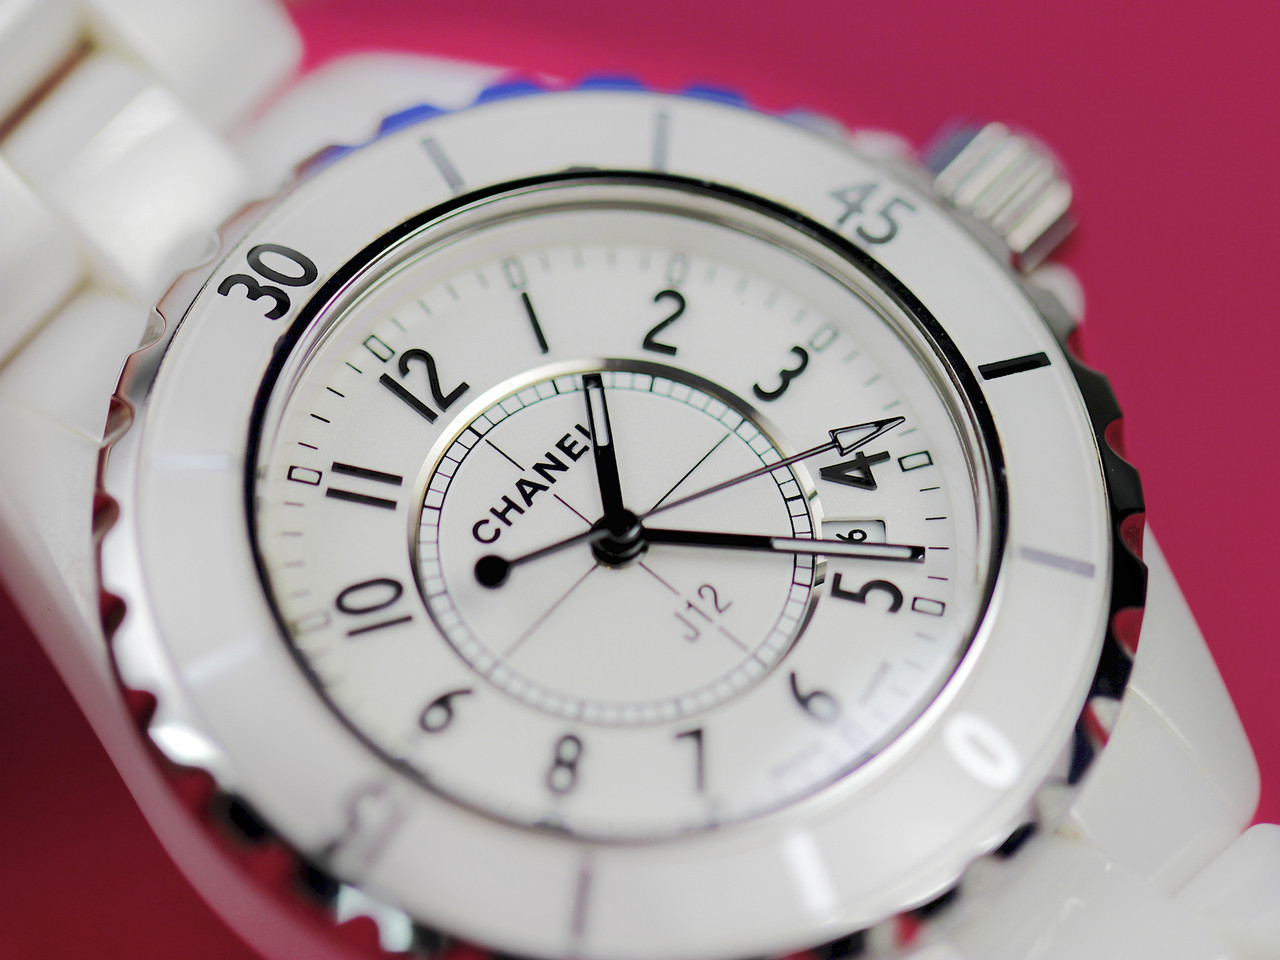 Chanel Watch - J12 White Ceramic 33mm Quartz H0968 used for sale Legend of  Time Chicago Watch Center